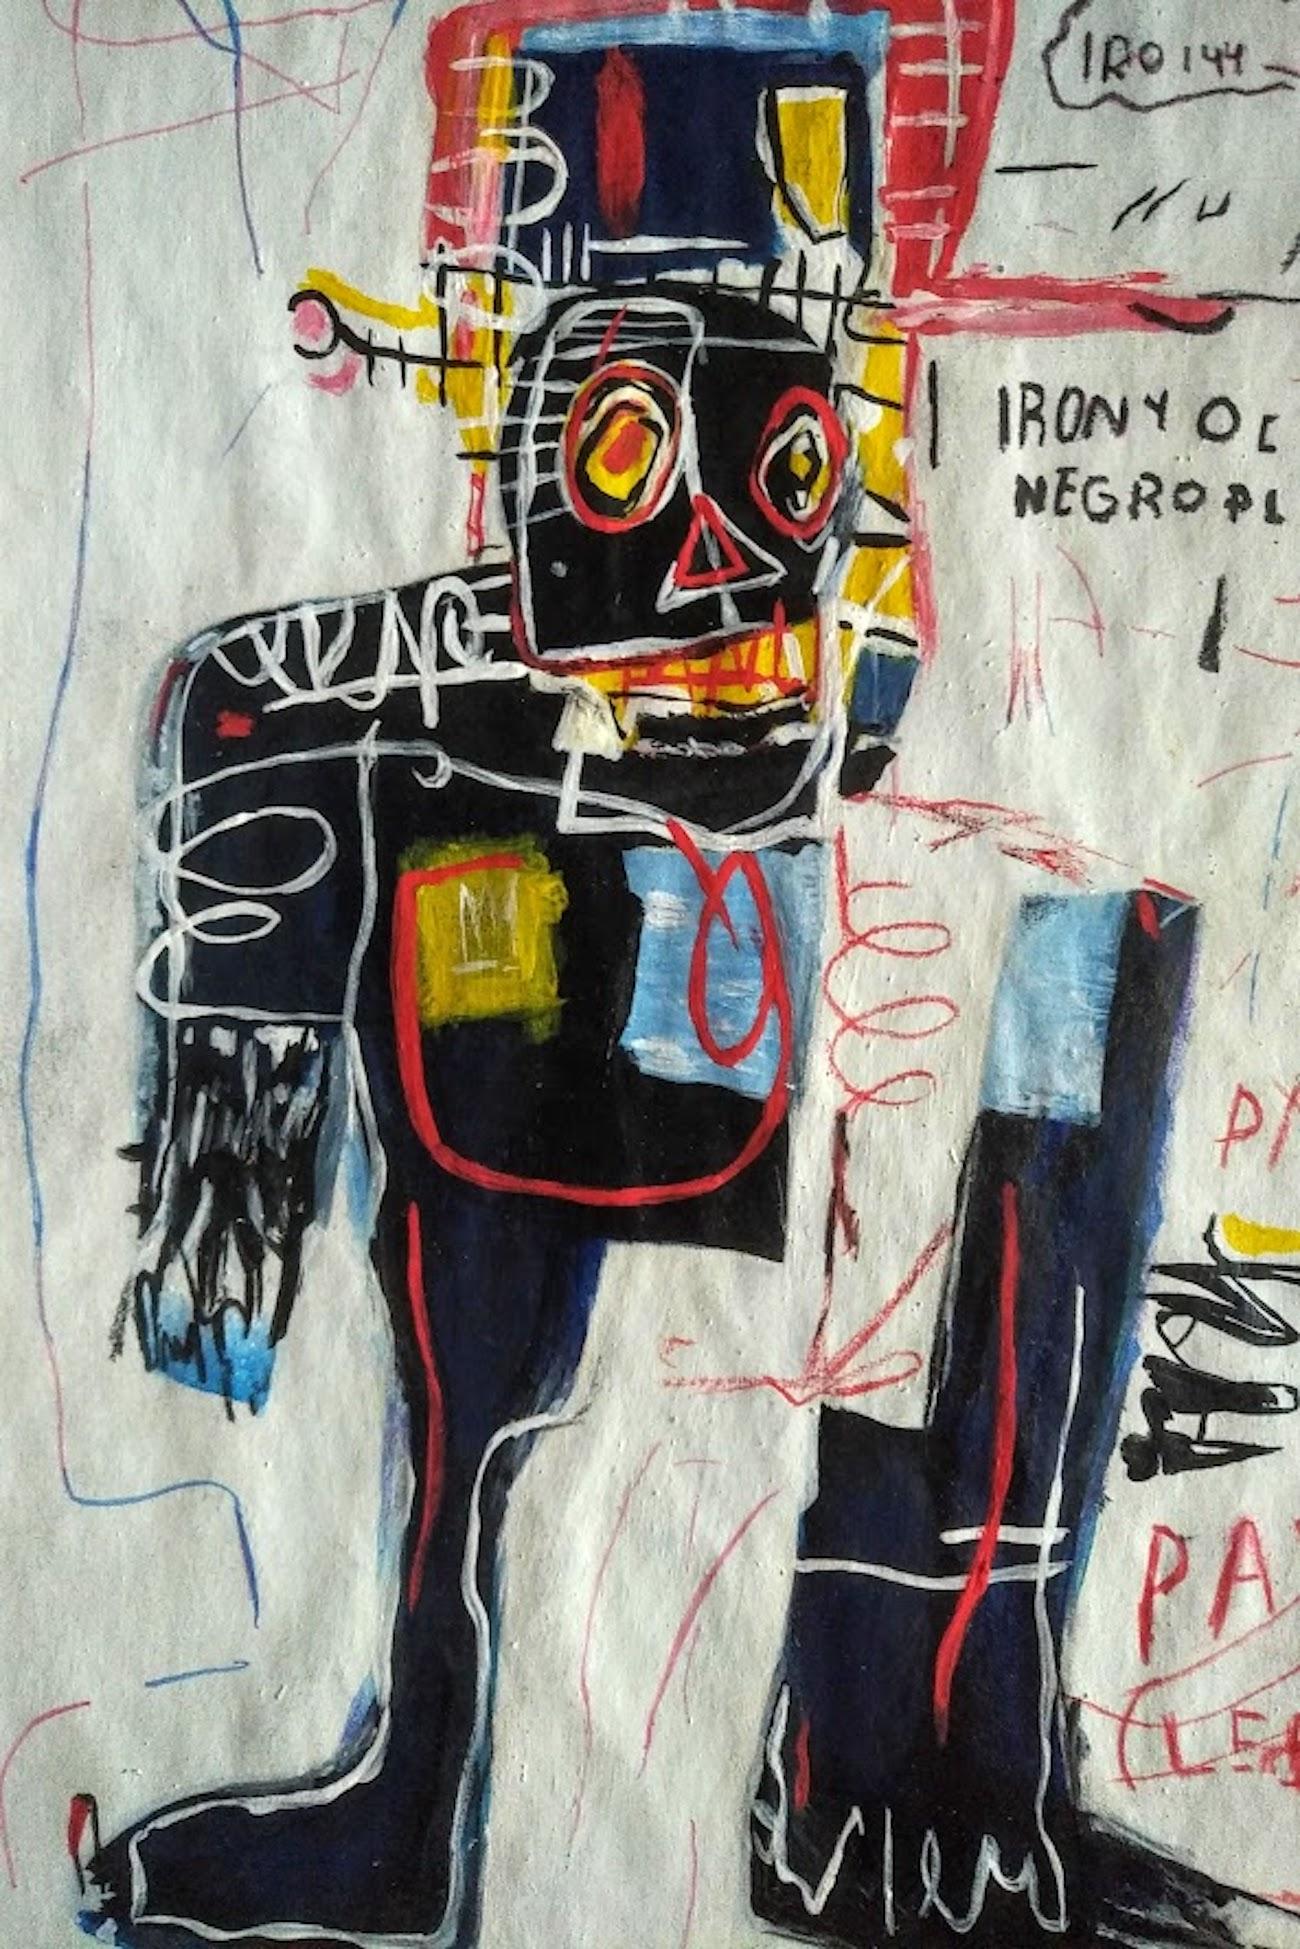 after Jean-Michel Basquiat Abstract Drawing - The Estate Of Jean-Michel Basquiat - Irony of Negro Policeman, Mixed Media